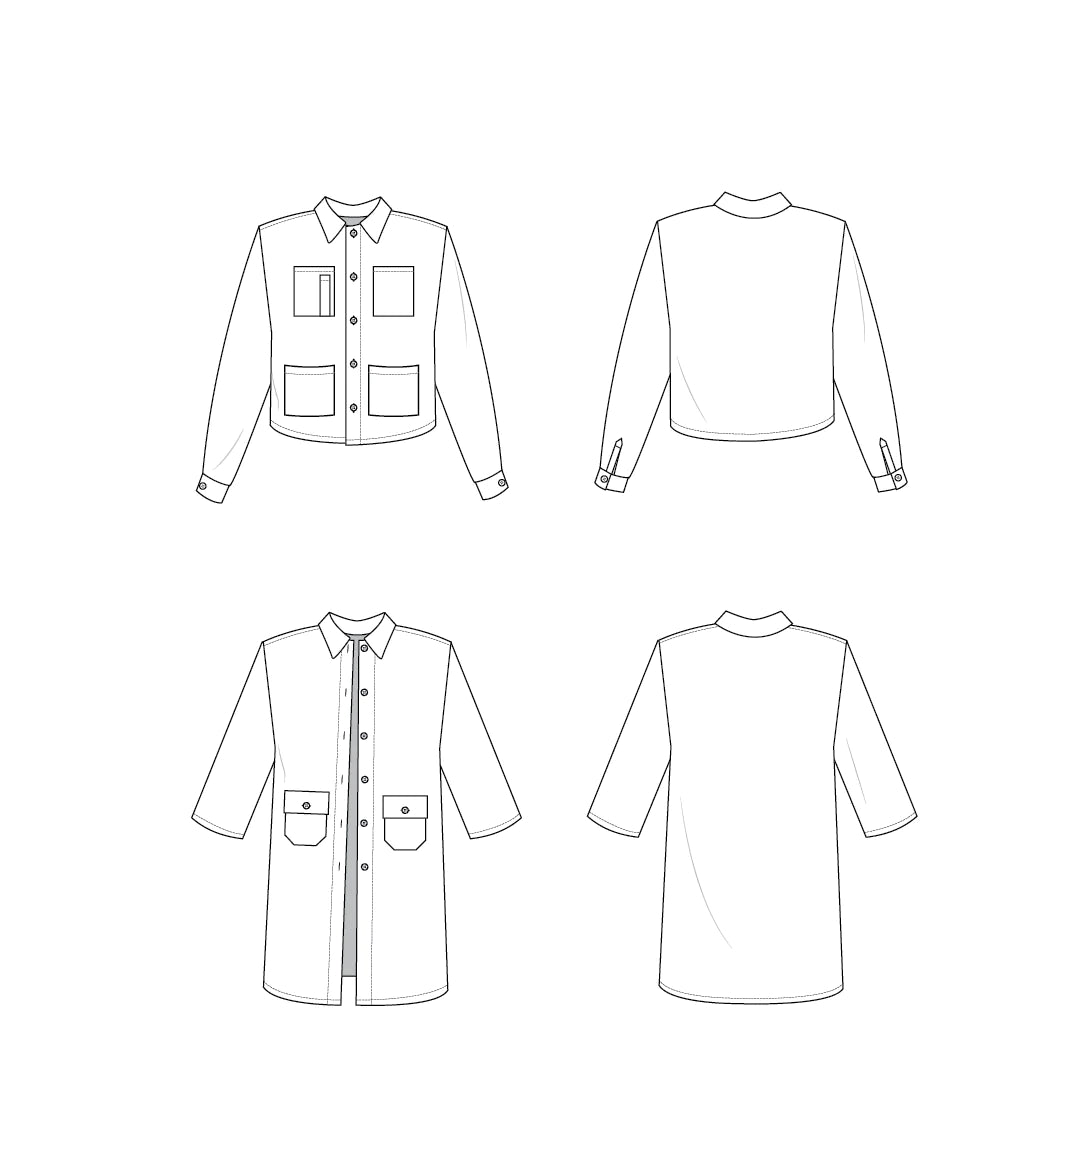 Buy The Ilford Jacket sewing pattern from Friday Pattern Company.